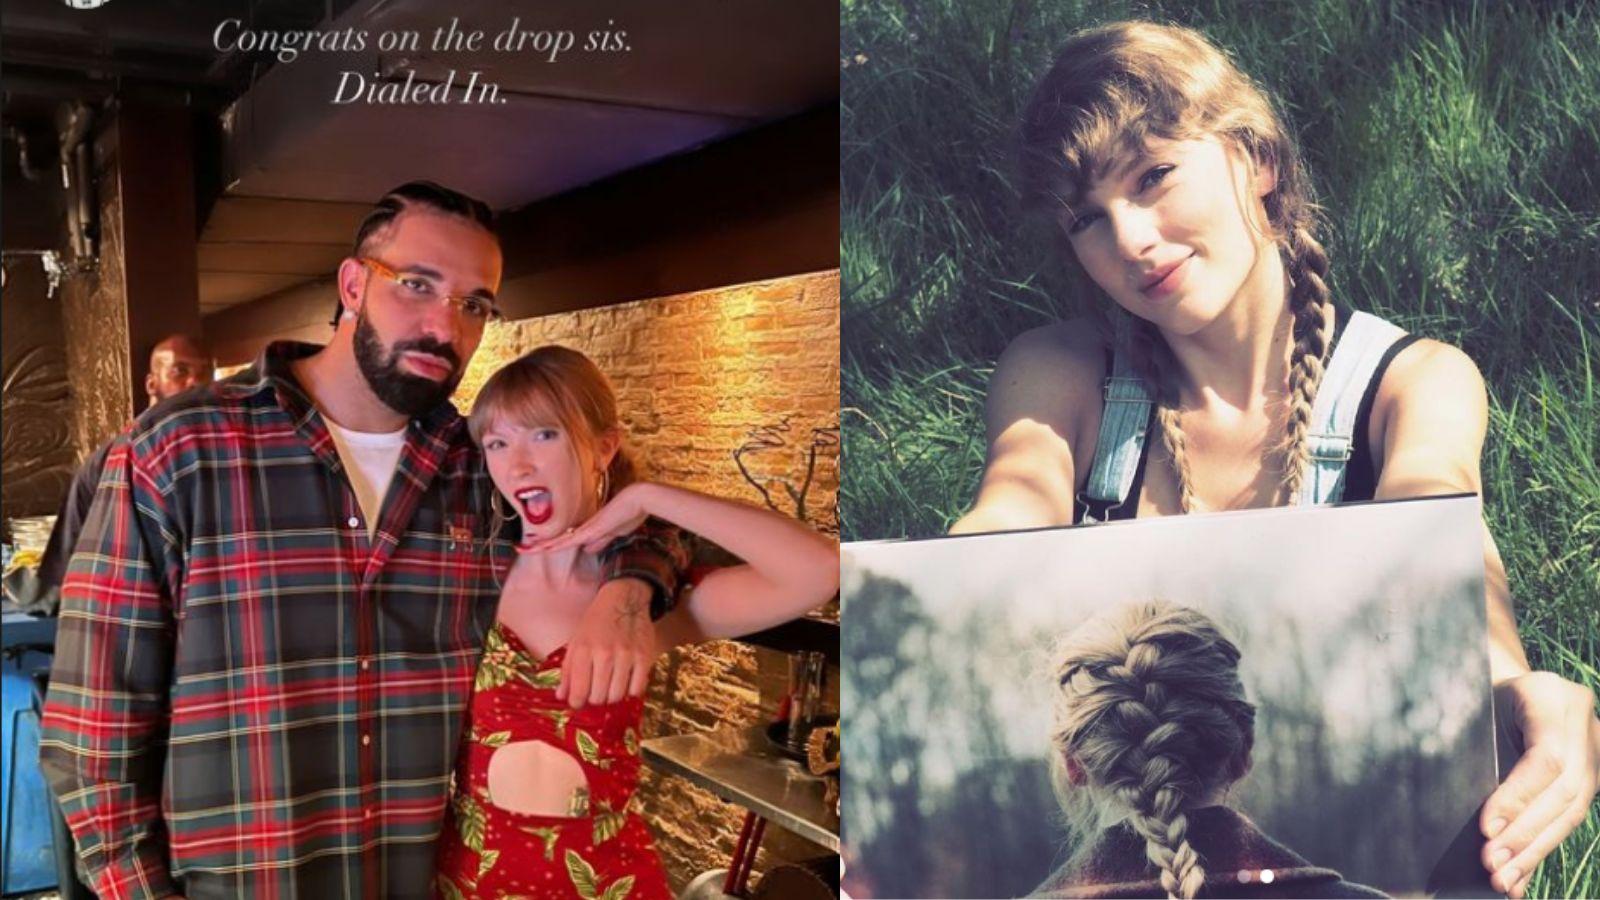 Drake with Taylor's lookalike, Jaime Carson and Taylor Swift